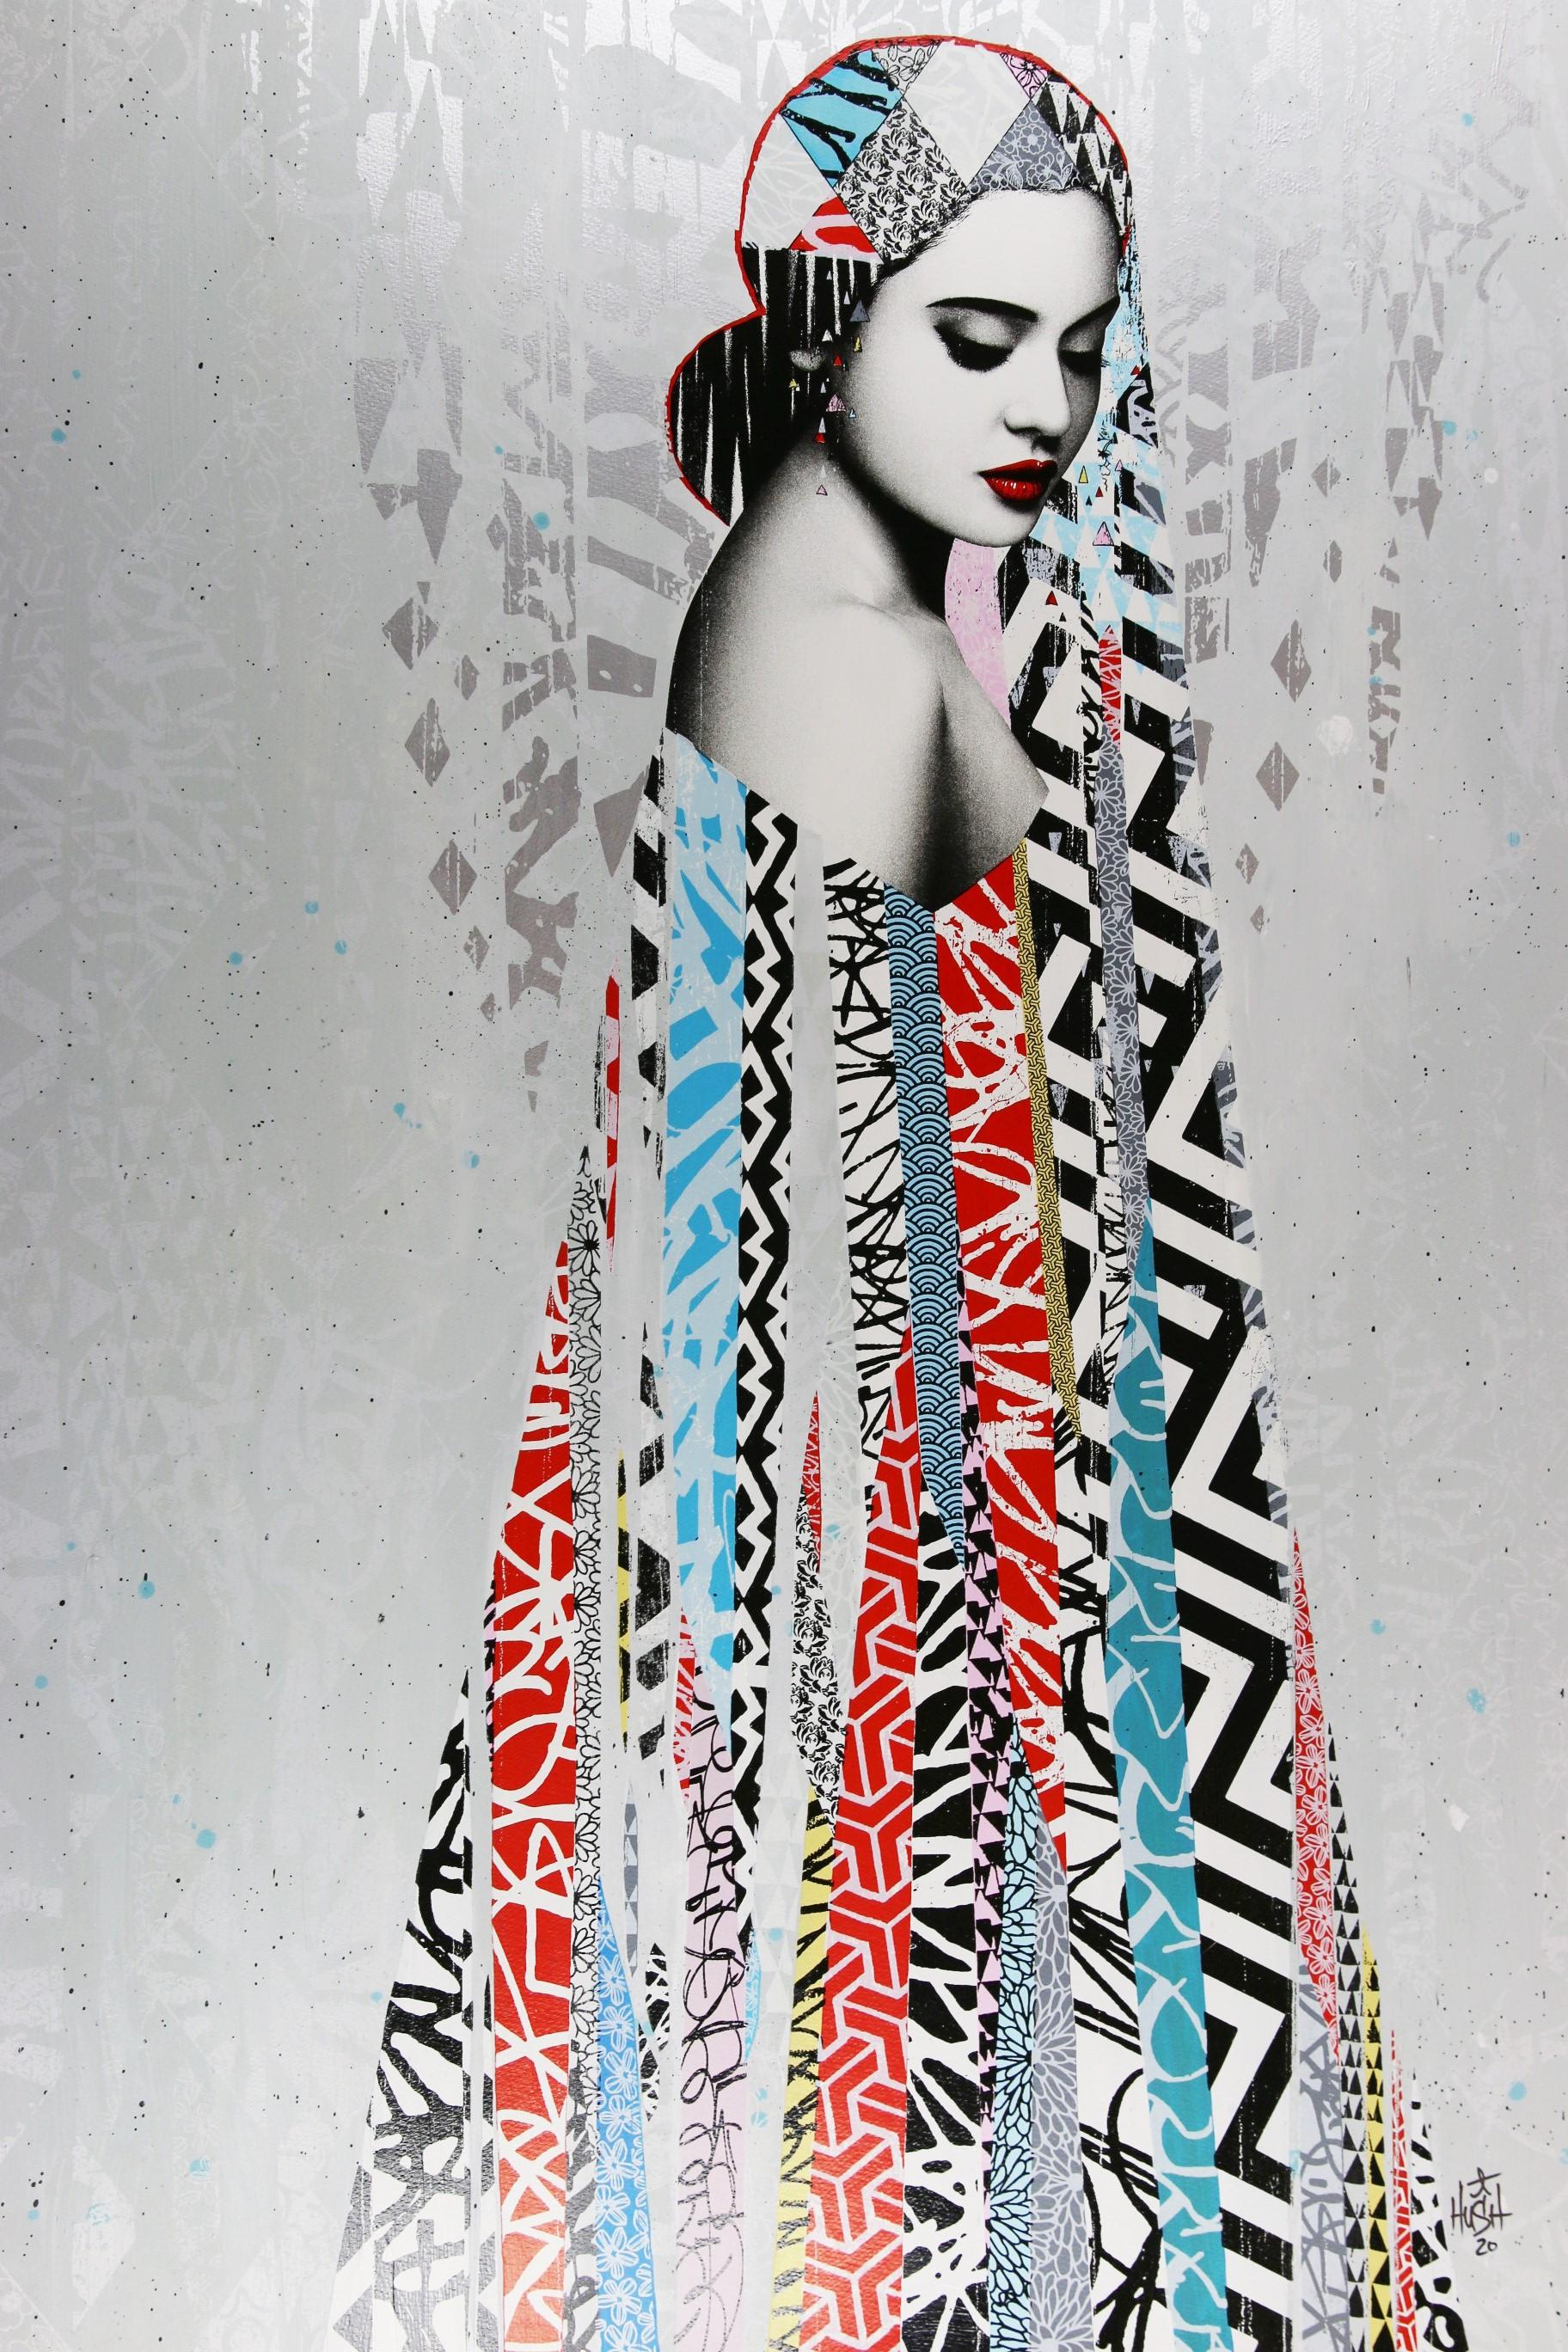 HUSH Figurative Print - Elysian by Hush Signed and Numbered Hand Painted Multiple Screen Print